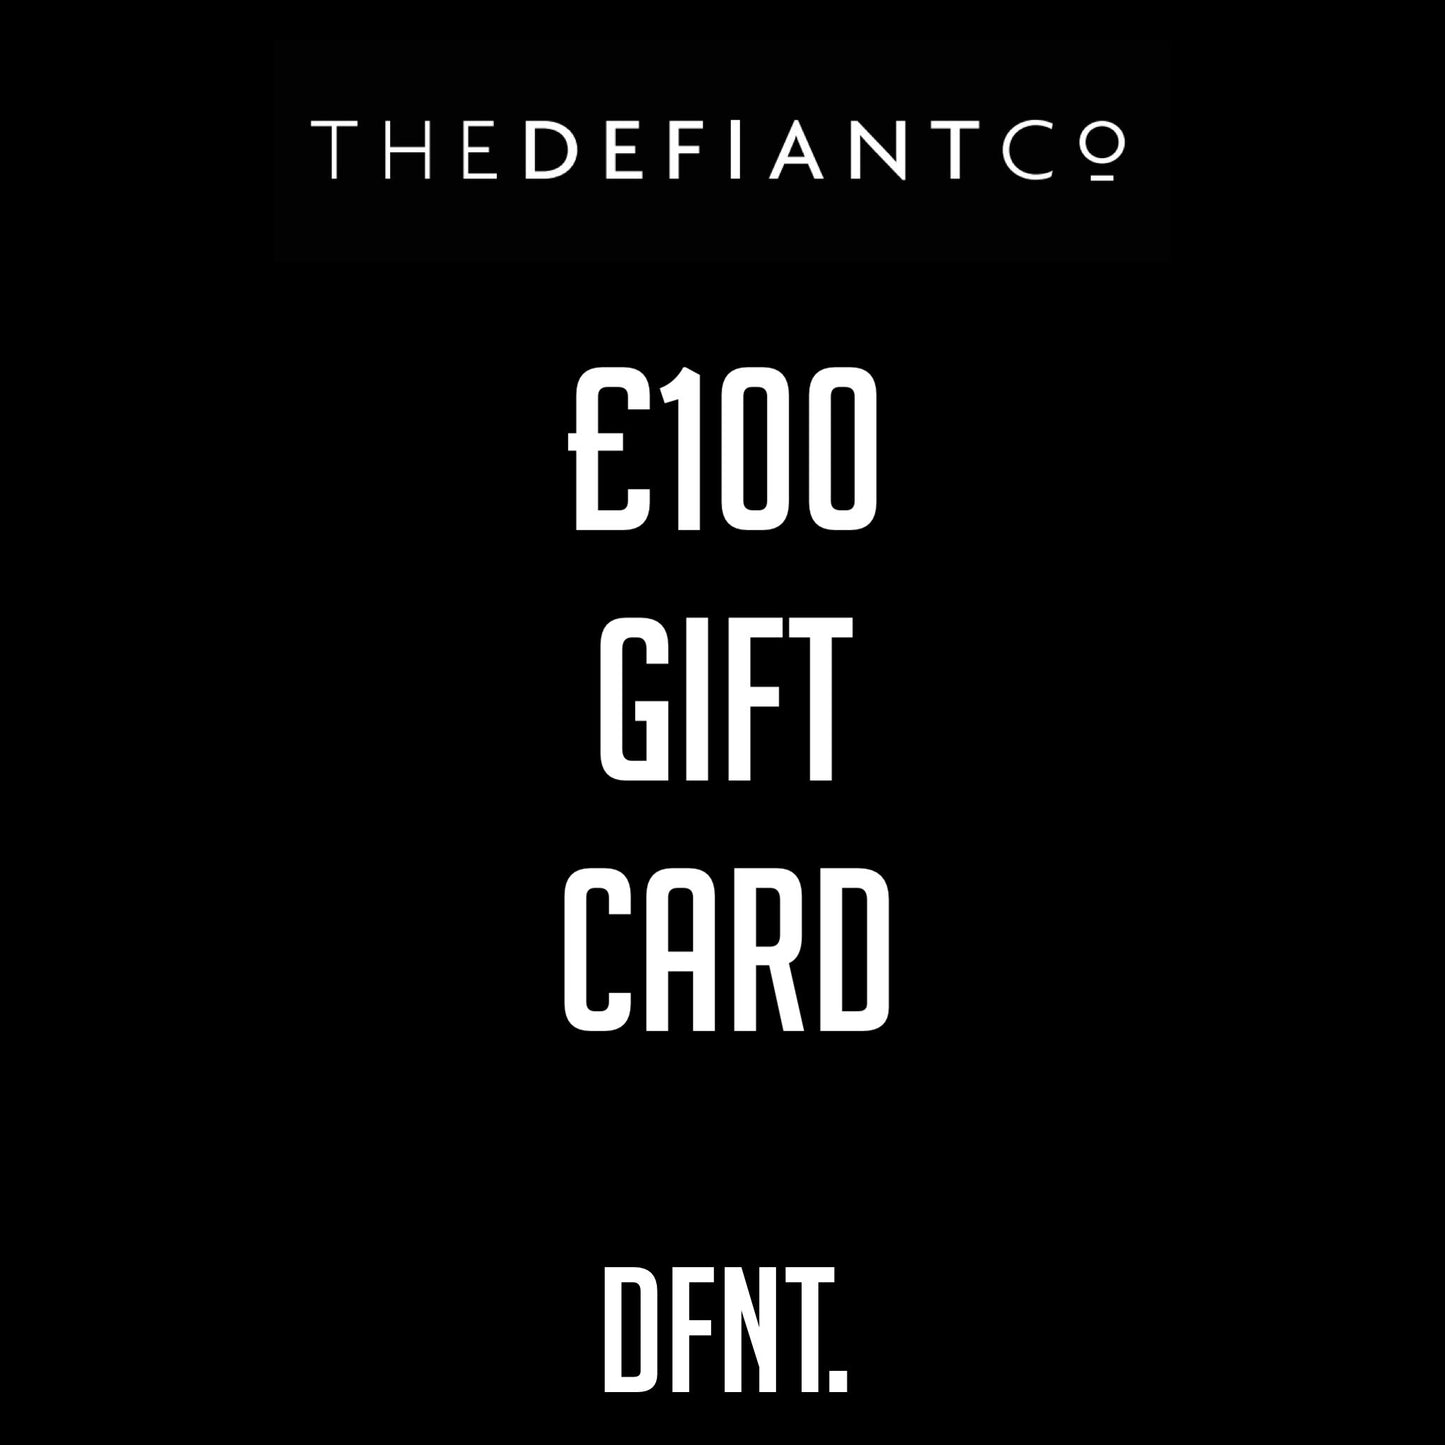 A photo of The Defiant co Gift Card.  The gift card shows both The Defiant Co and DFNT. logos at the top and bottom respectively. Gifts cards are a great gift idea for your friends and family. The centre displays the value of the Gift Card which is £100.